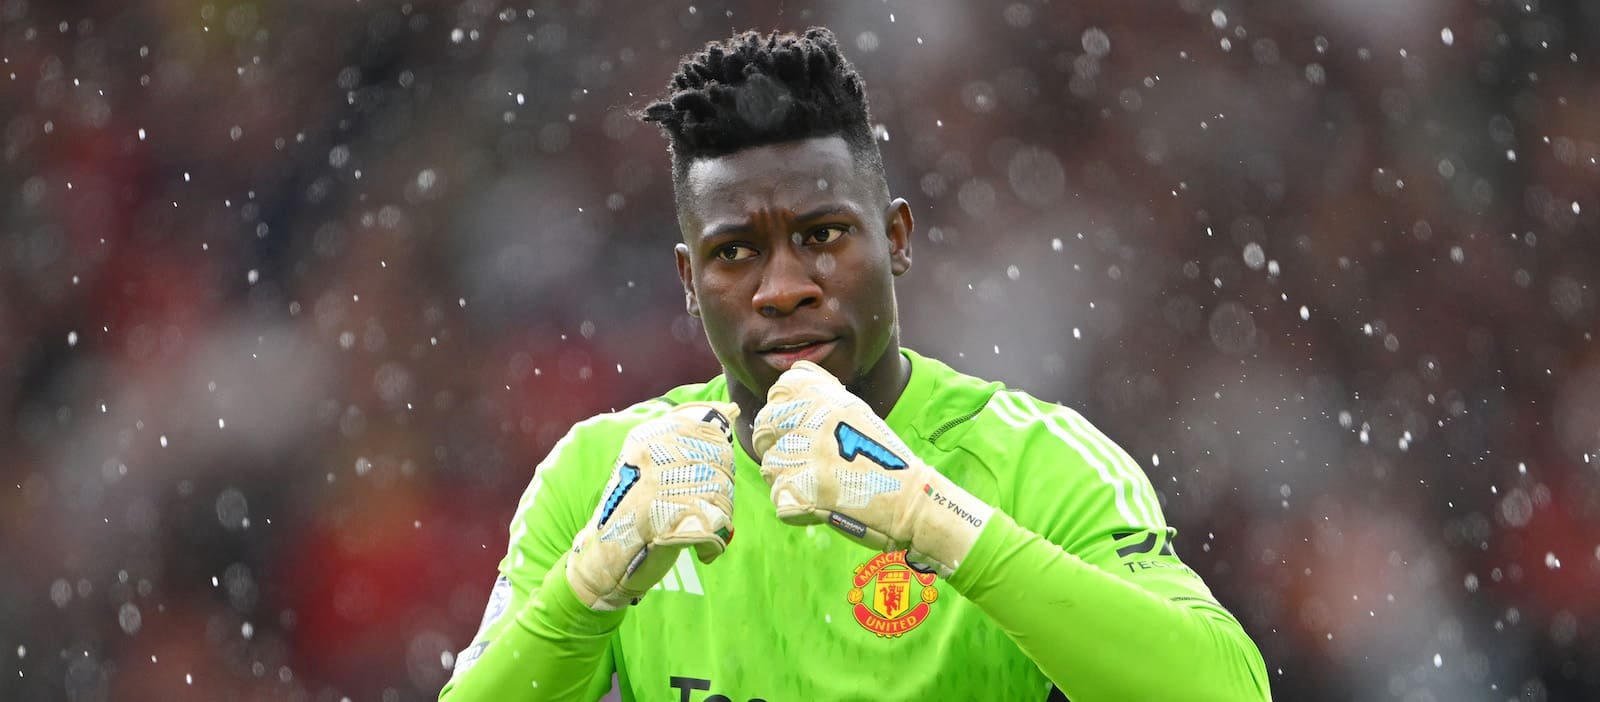 Peter Schmeichel reacts to Andre Onana’s dramatic late penalty save in Manchester United’s win against FC Copenhagen – Man United News And Transfer News